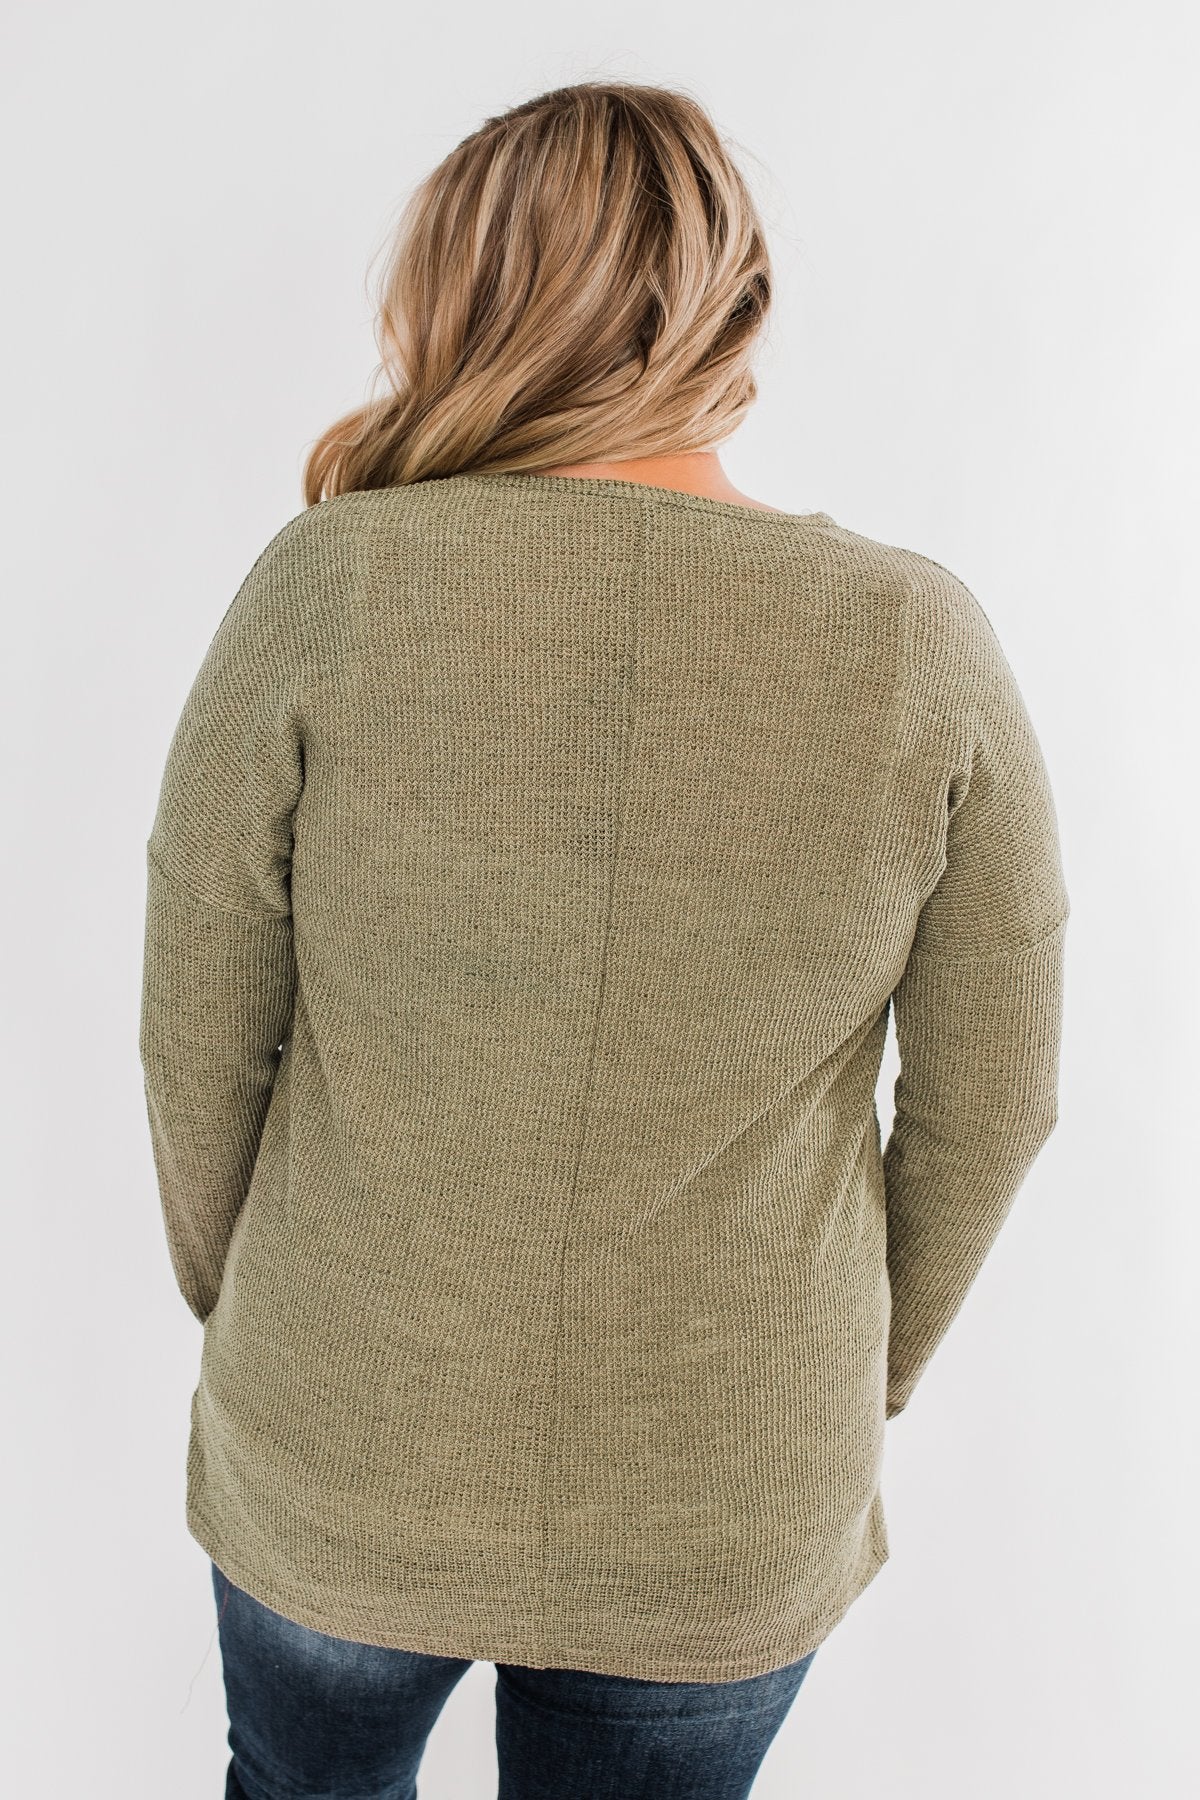 Simple As Can Be Knitted Top- Olive